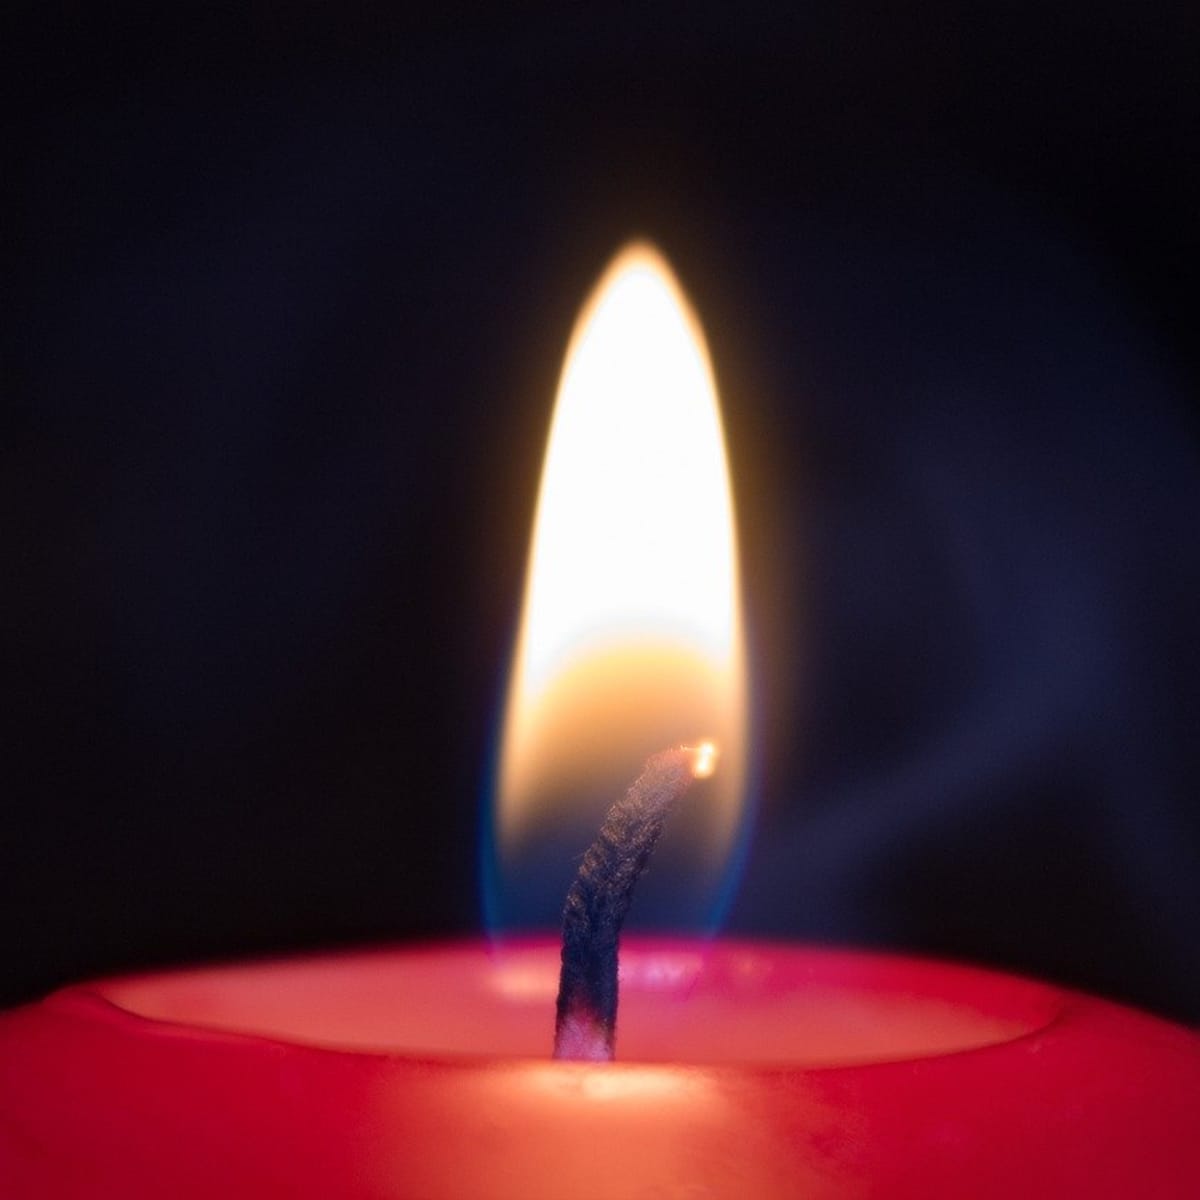 Burning candle with melting wax close-up on a black background